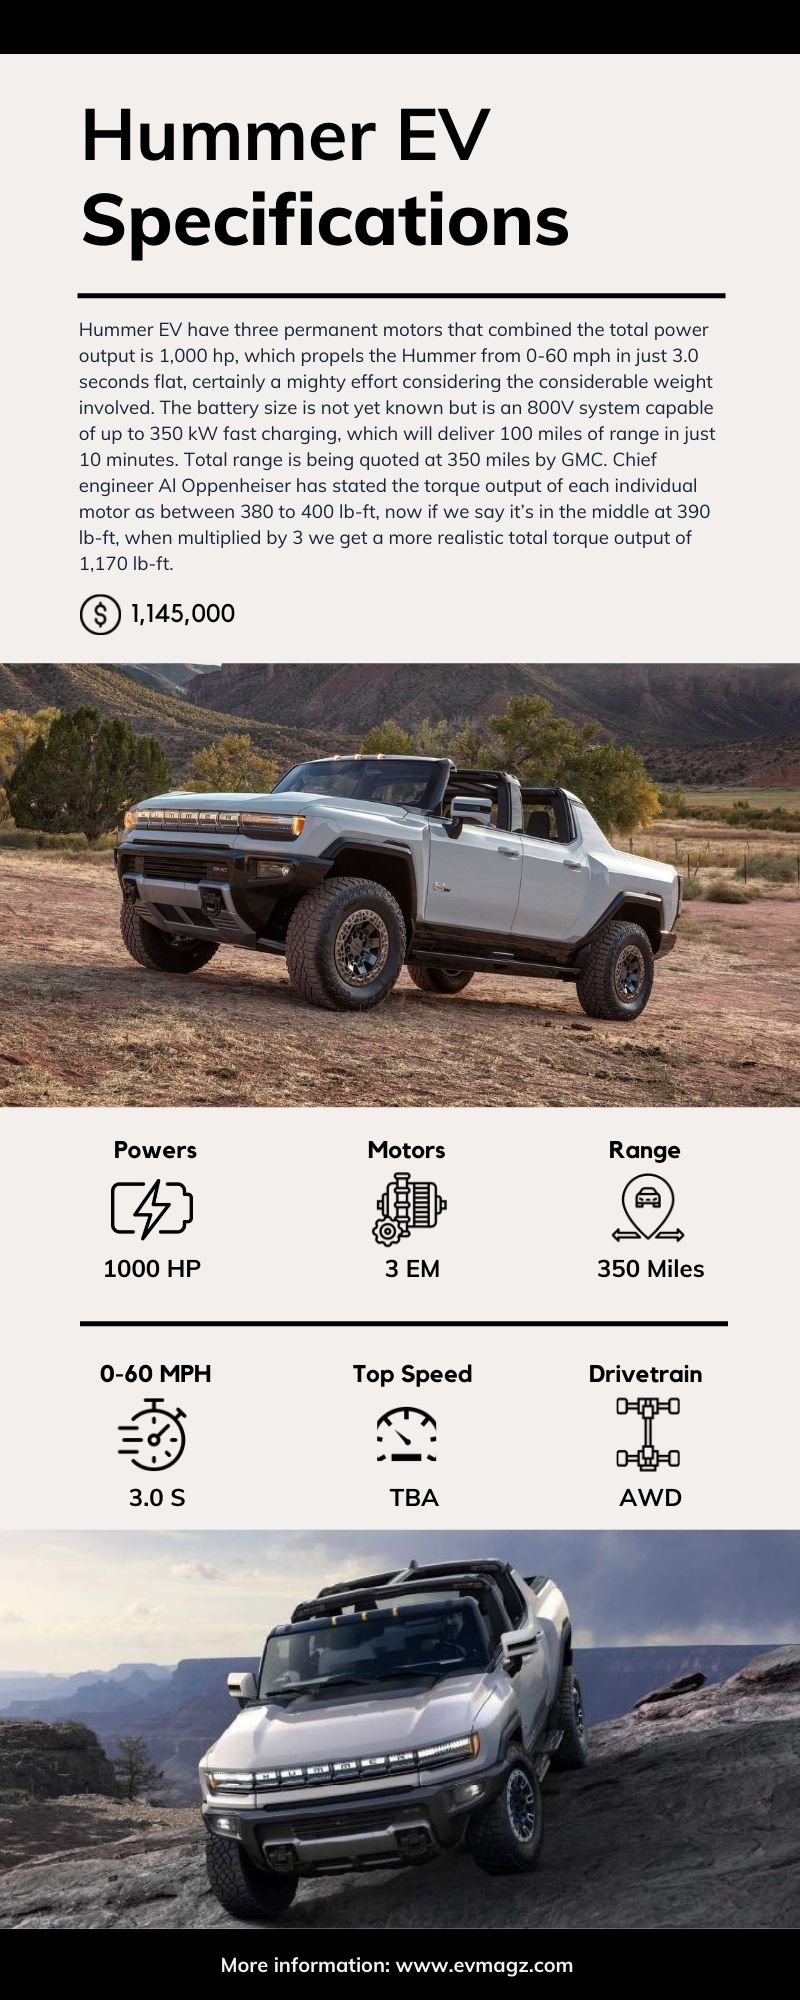 Specification EV - Hummer EV Price and Specifications [Infographic]